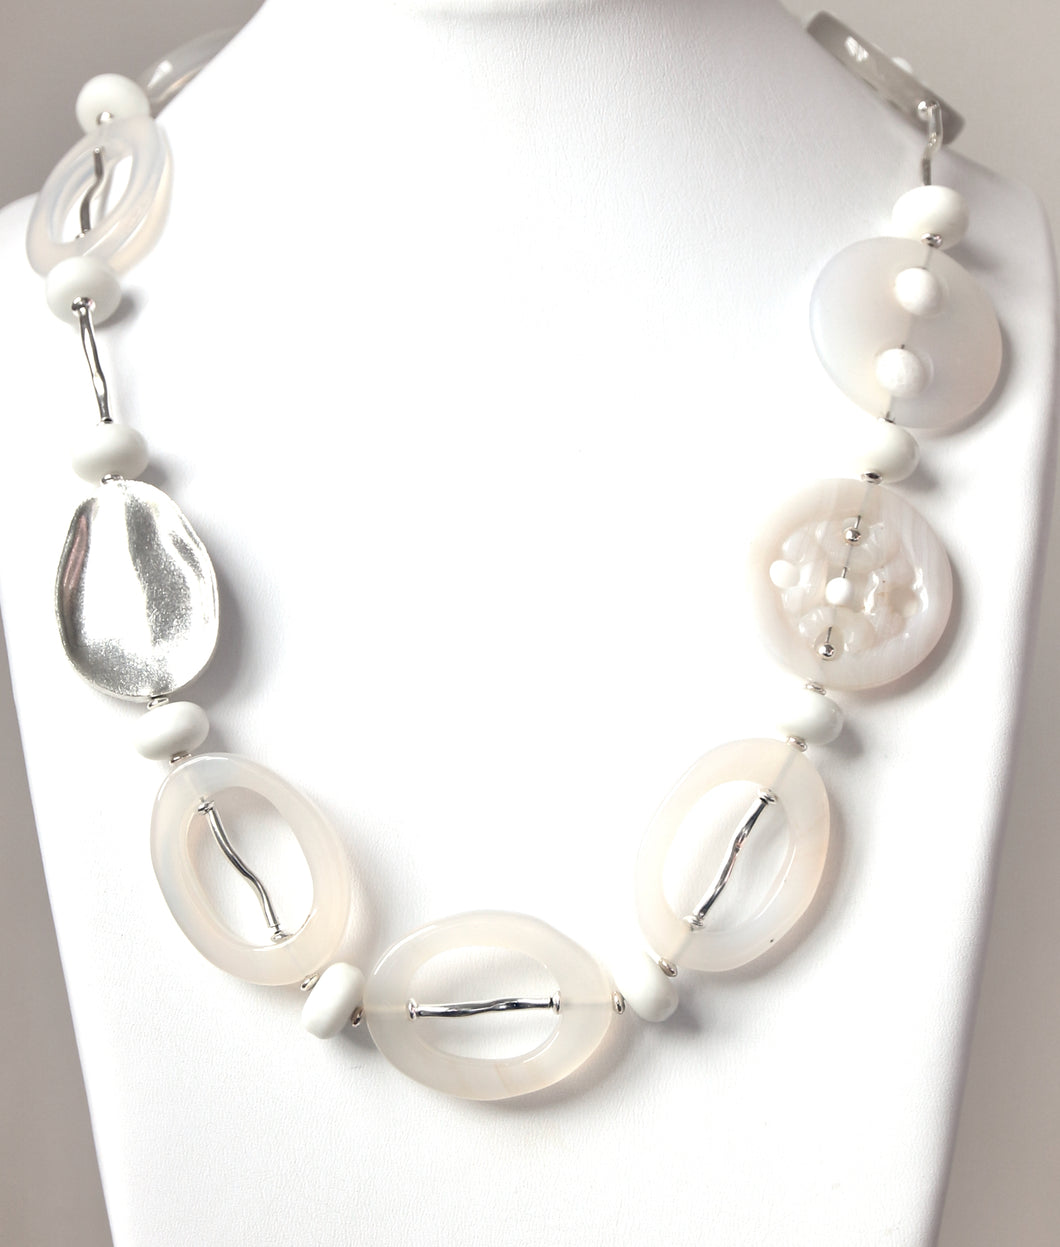 Australian Handmade White Necklace with White Agate White Jade and Sterling Silver